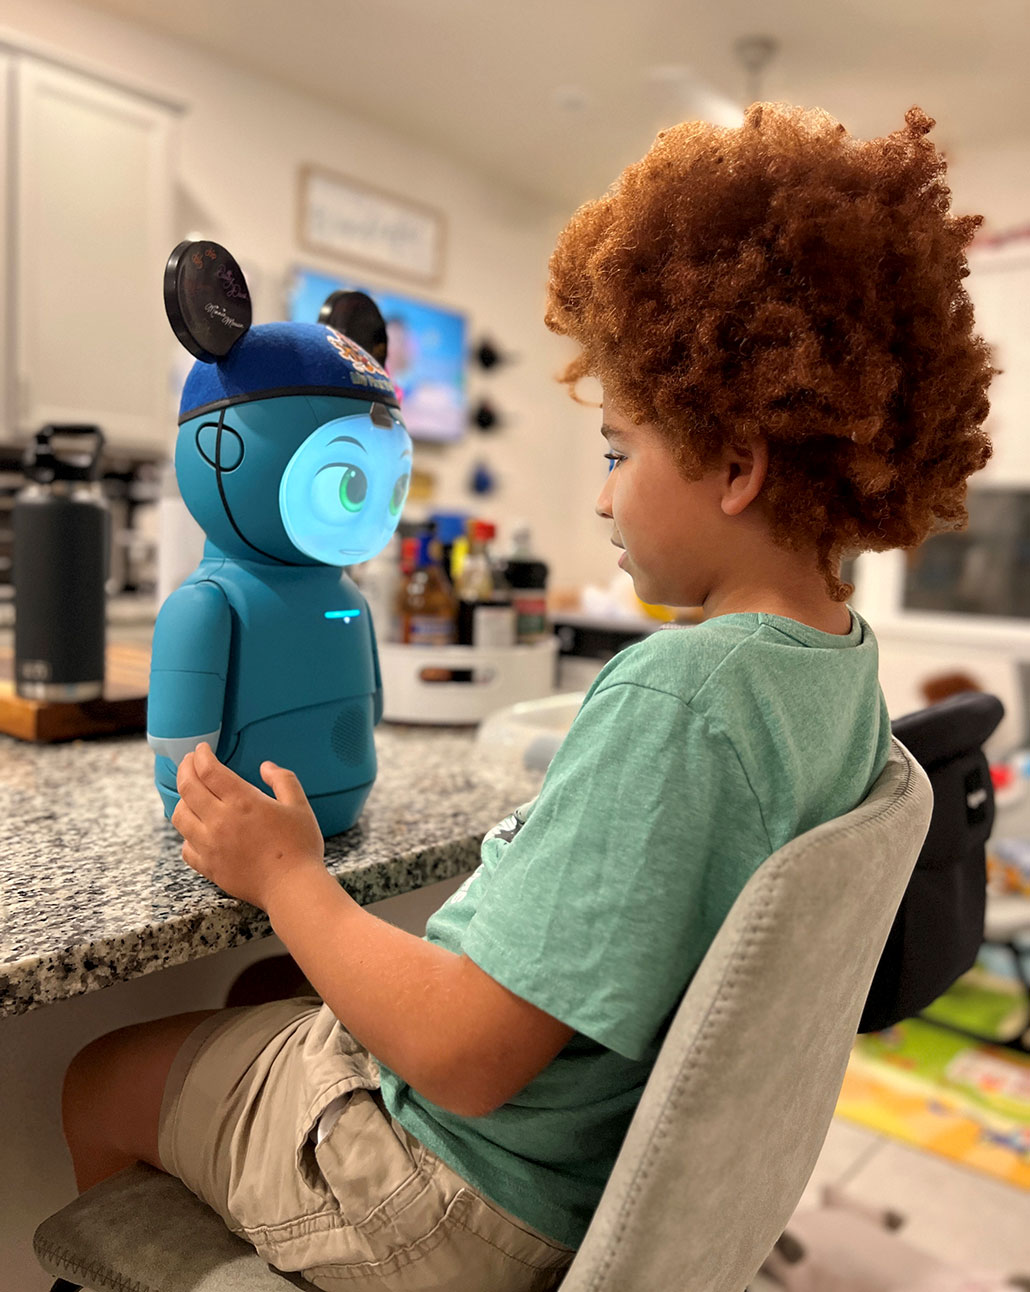 Moxie, a small blue robot wearing MIckey Mouse ears stands on a countertop and interacts with Rocco, a brown-skinned boy with curly red-brown hair in an afro